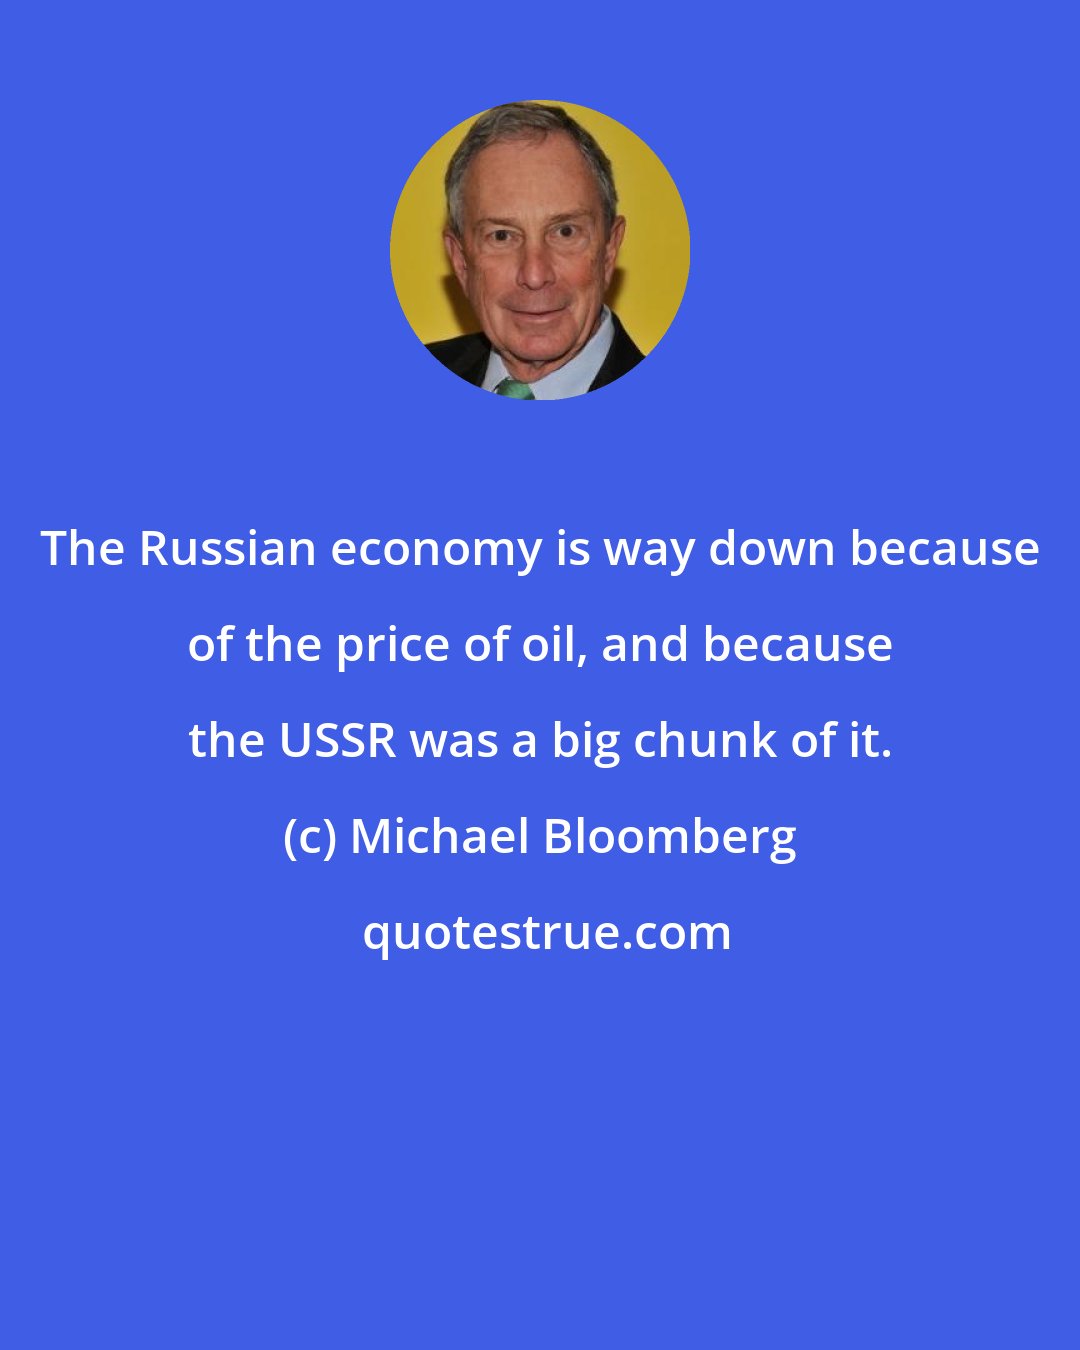 Michael Bloomberg: The Russian economy is way down because of the price of oil, and because the USSR was a big chunk of it.